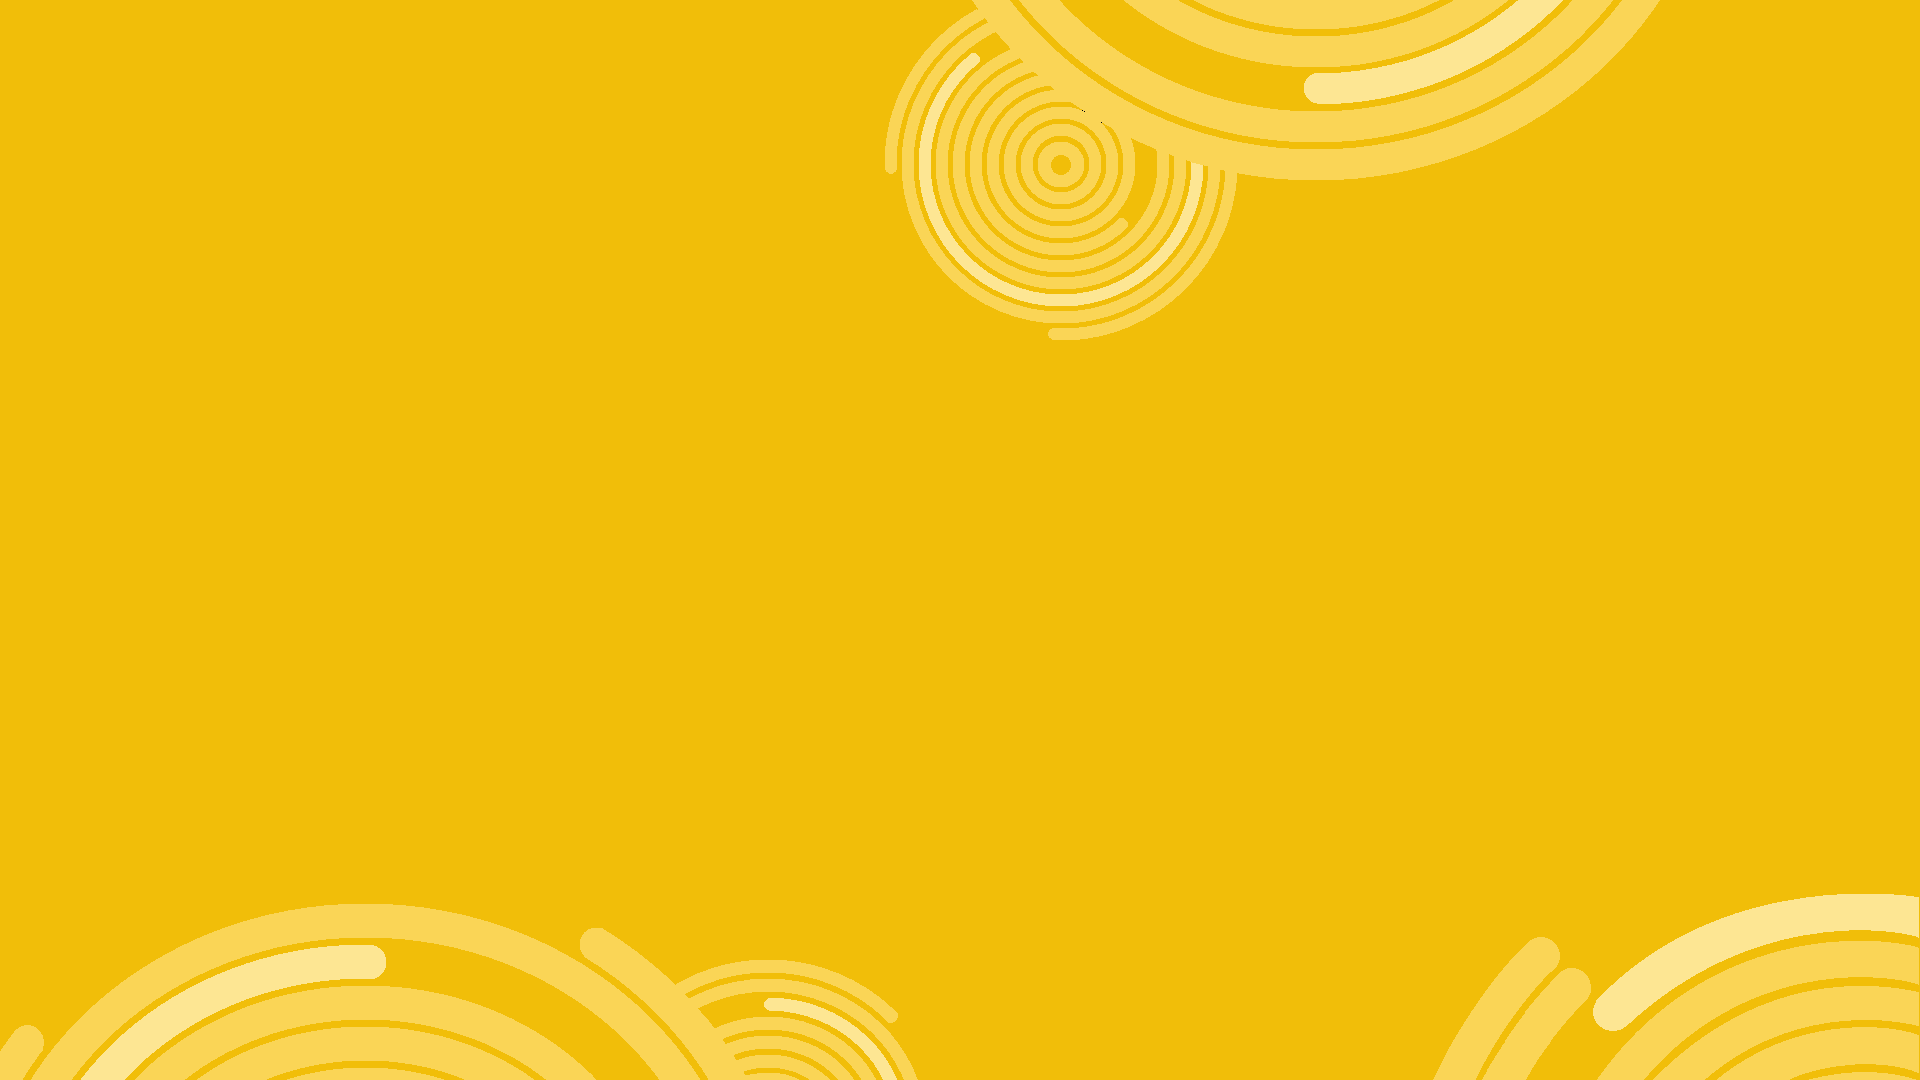 Free download Windows 8 Wallpaper Set 10 Awesome Wallpaper [1920x1080] for your Desktop, Mobile & Tablet. Explore The Yellow Wallpaper Setting. The Yellow Wallpaper Analysis, Yellow Wallpaper Setting, The Yellow Wallpaper Quotes